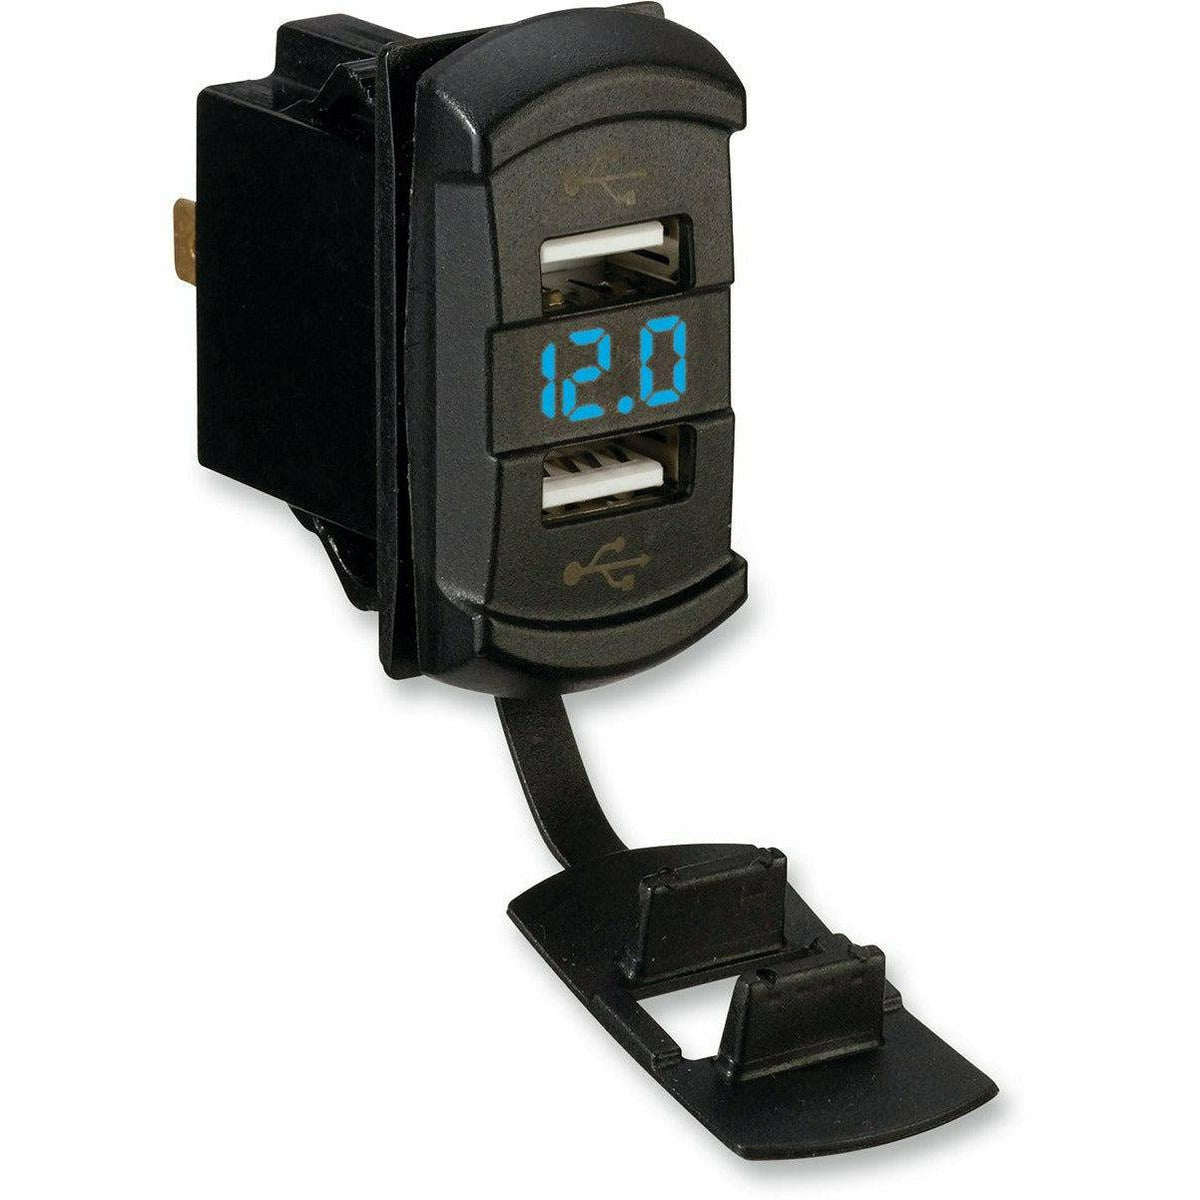 Moose Utility Dual USB Charger with Voltage Monitor